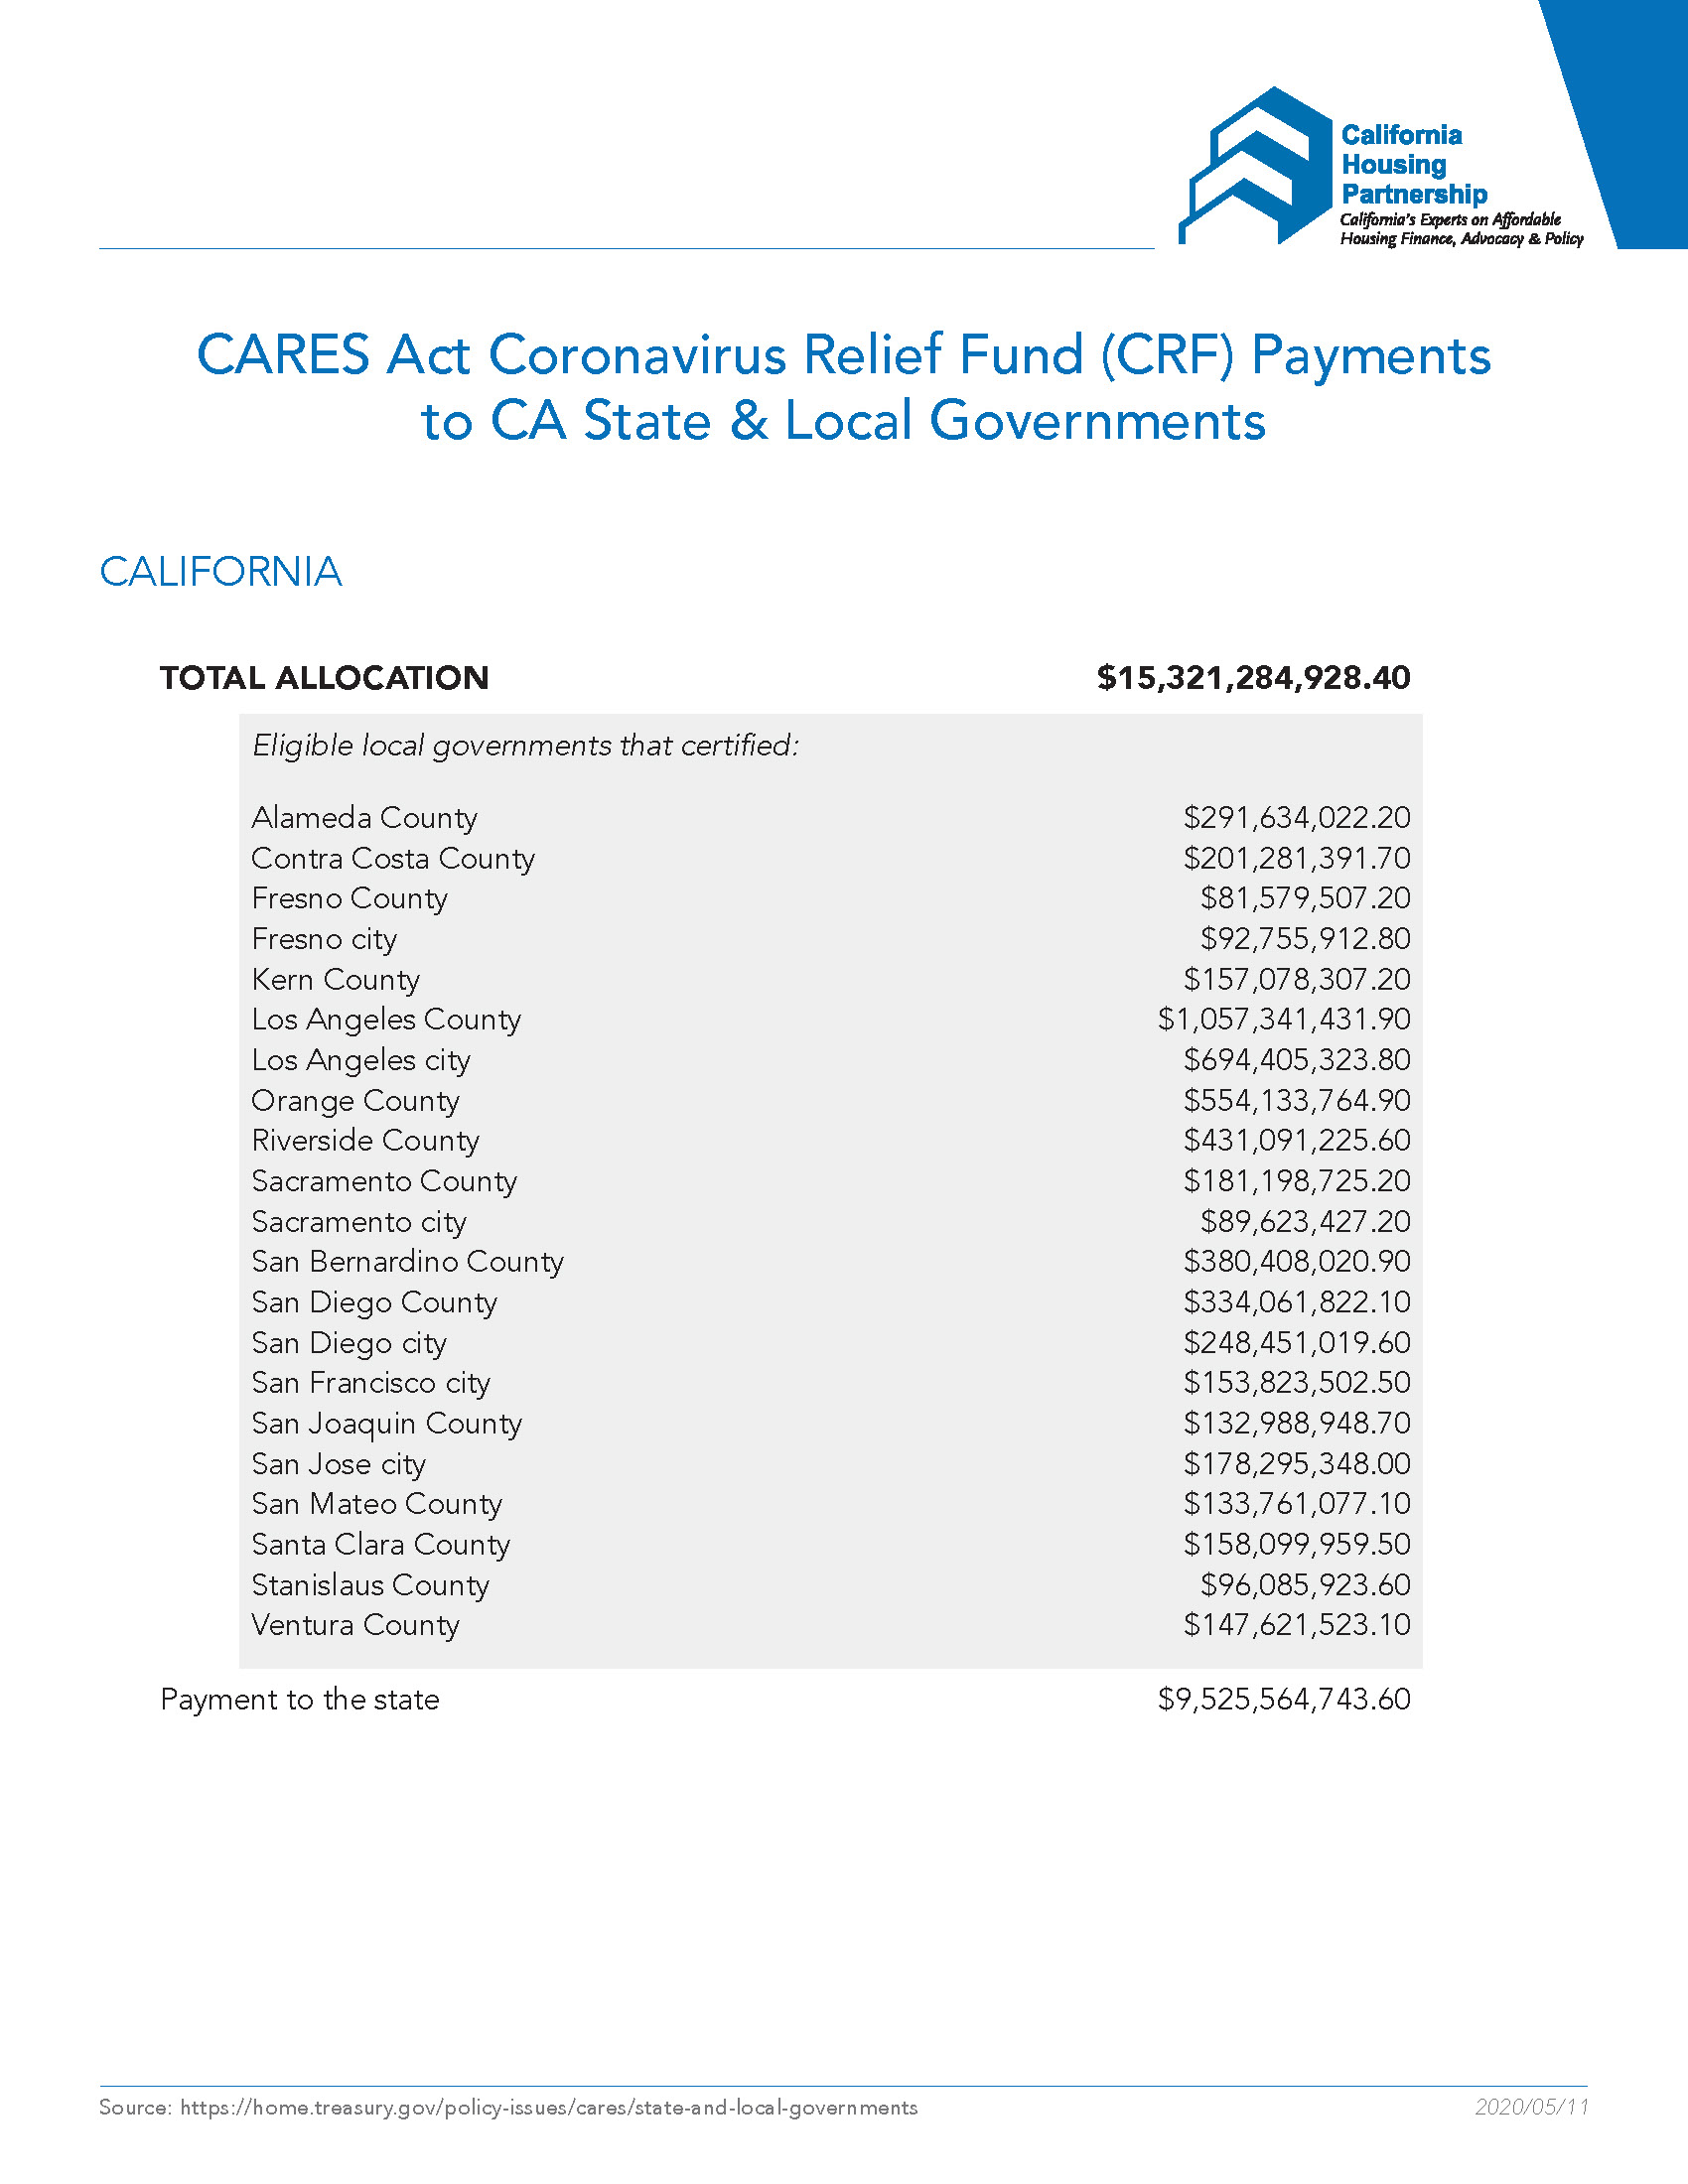 CARES Act CRF Payments CA